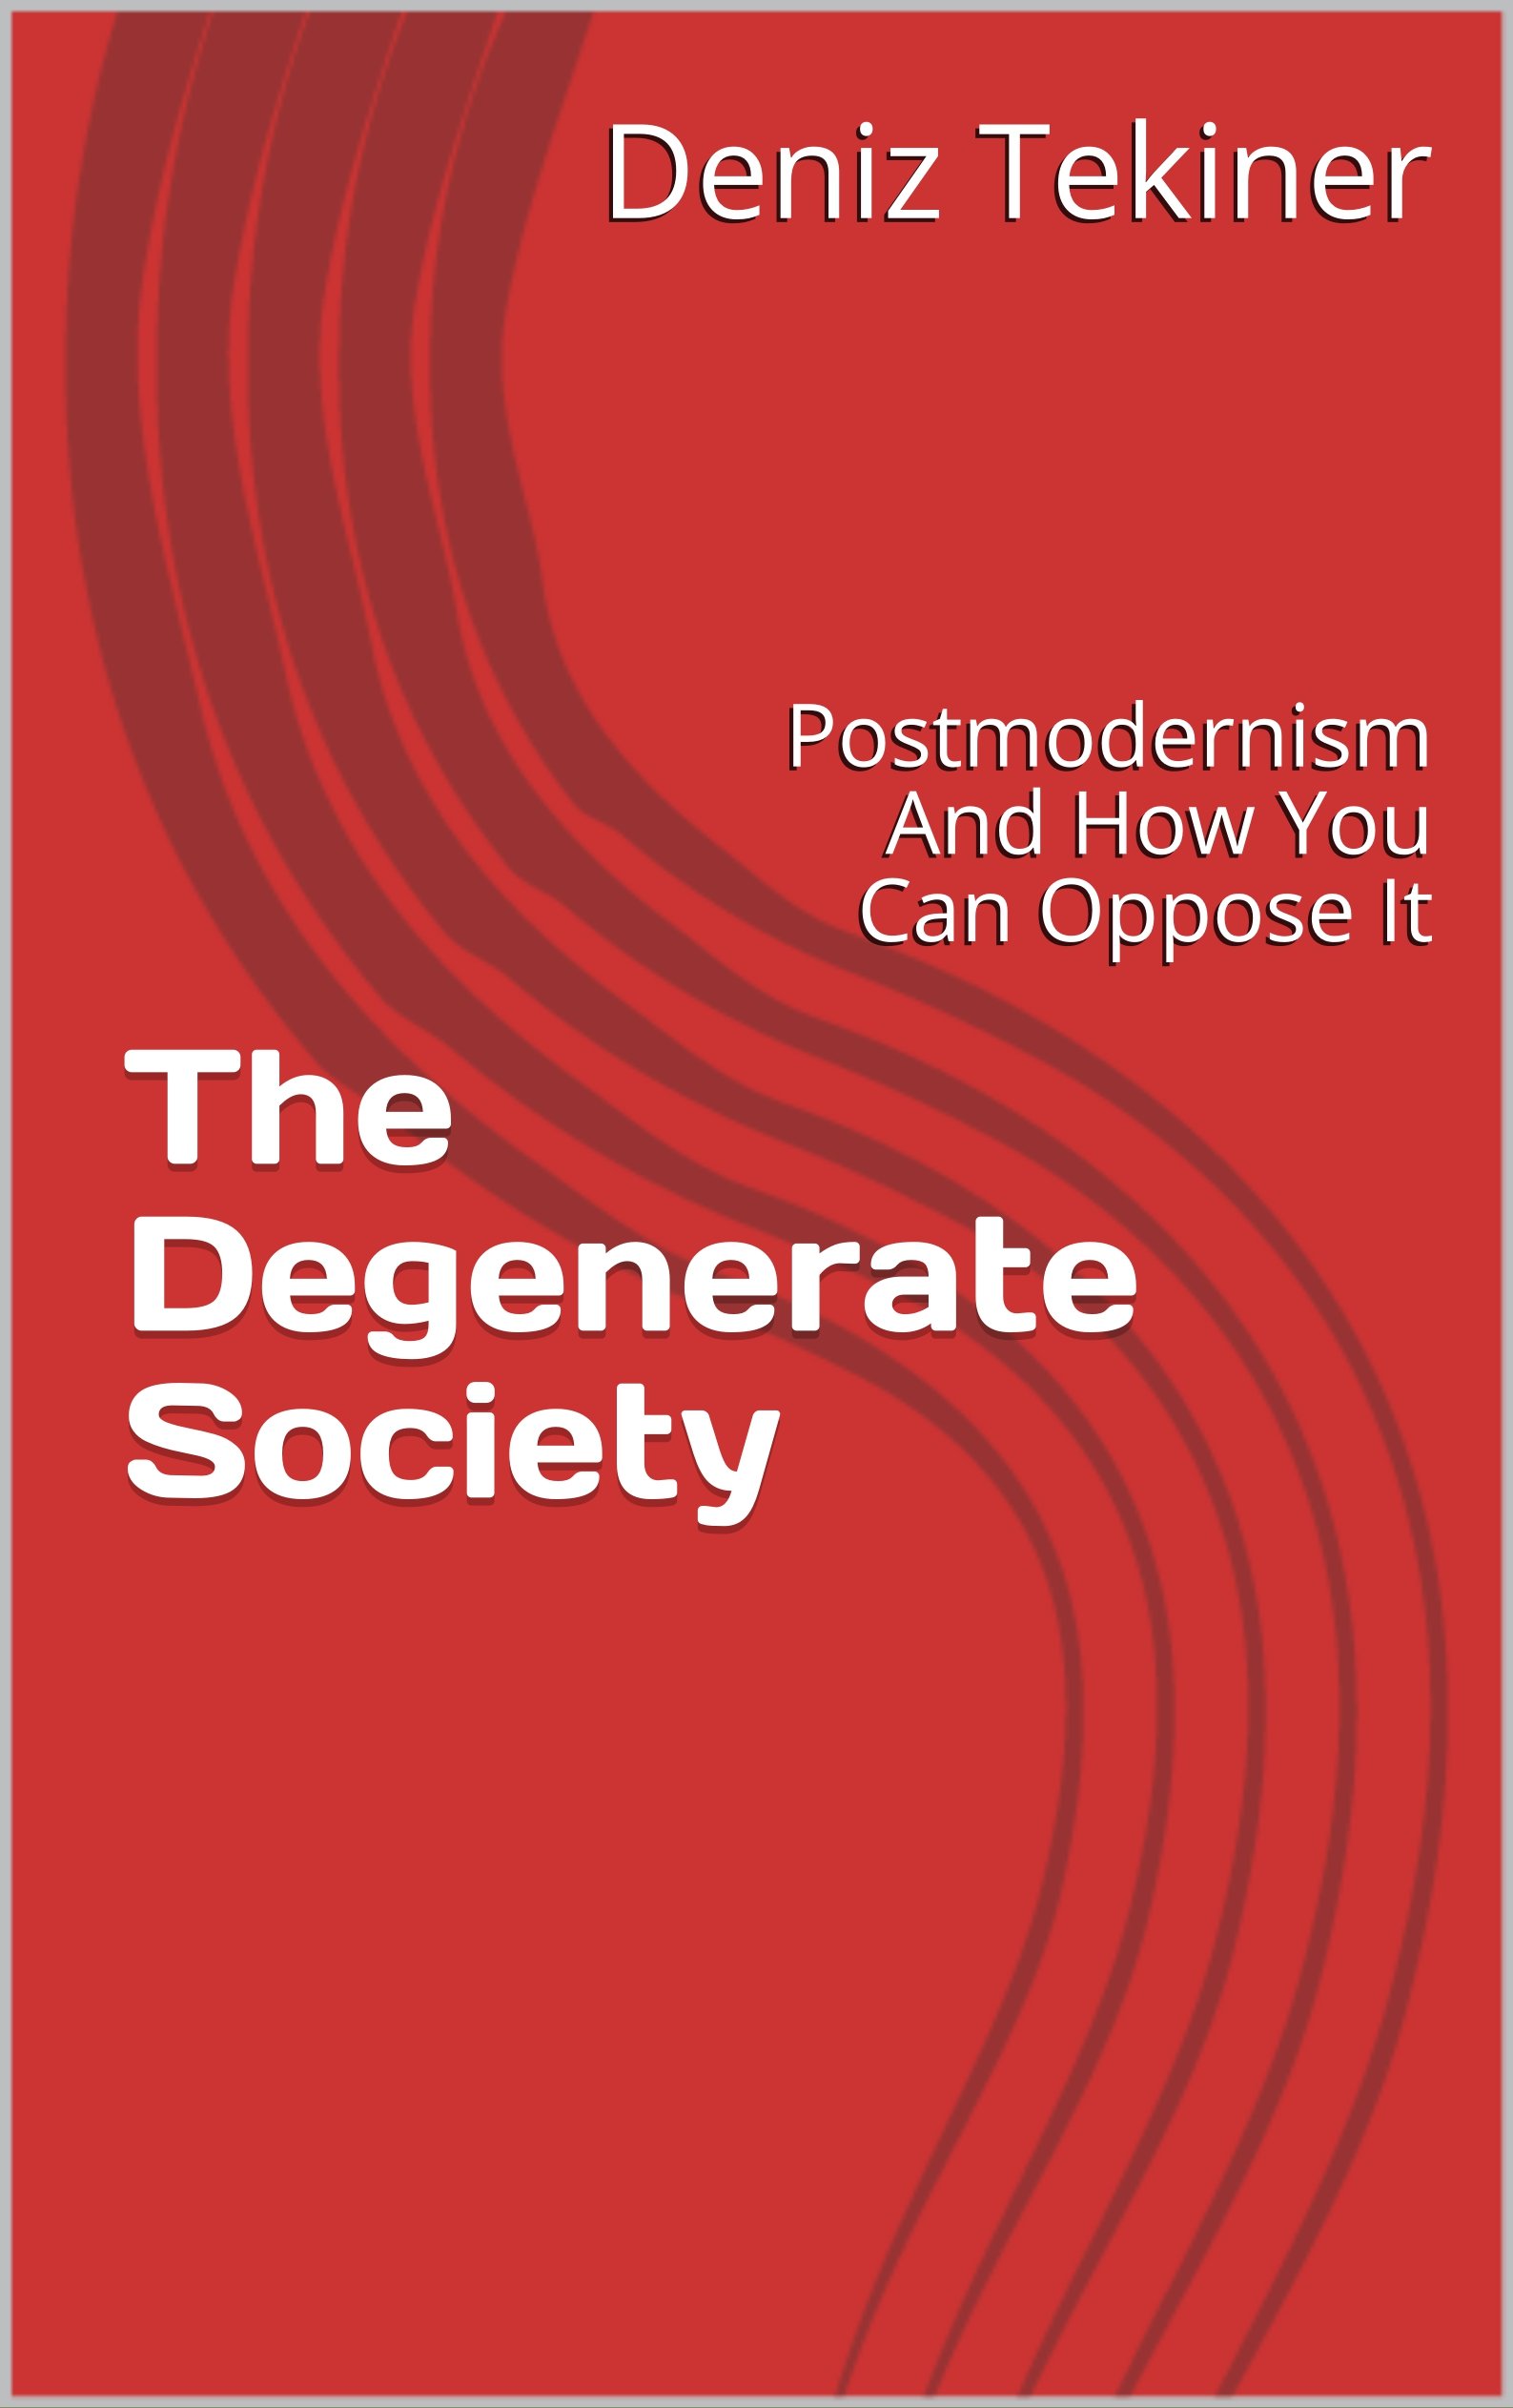 The Degenerate Society: Postmodernism And How You Can Oppose It